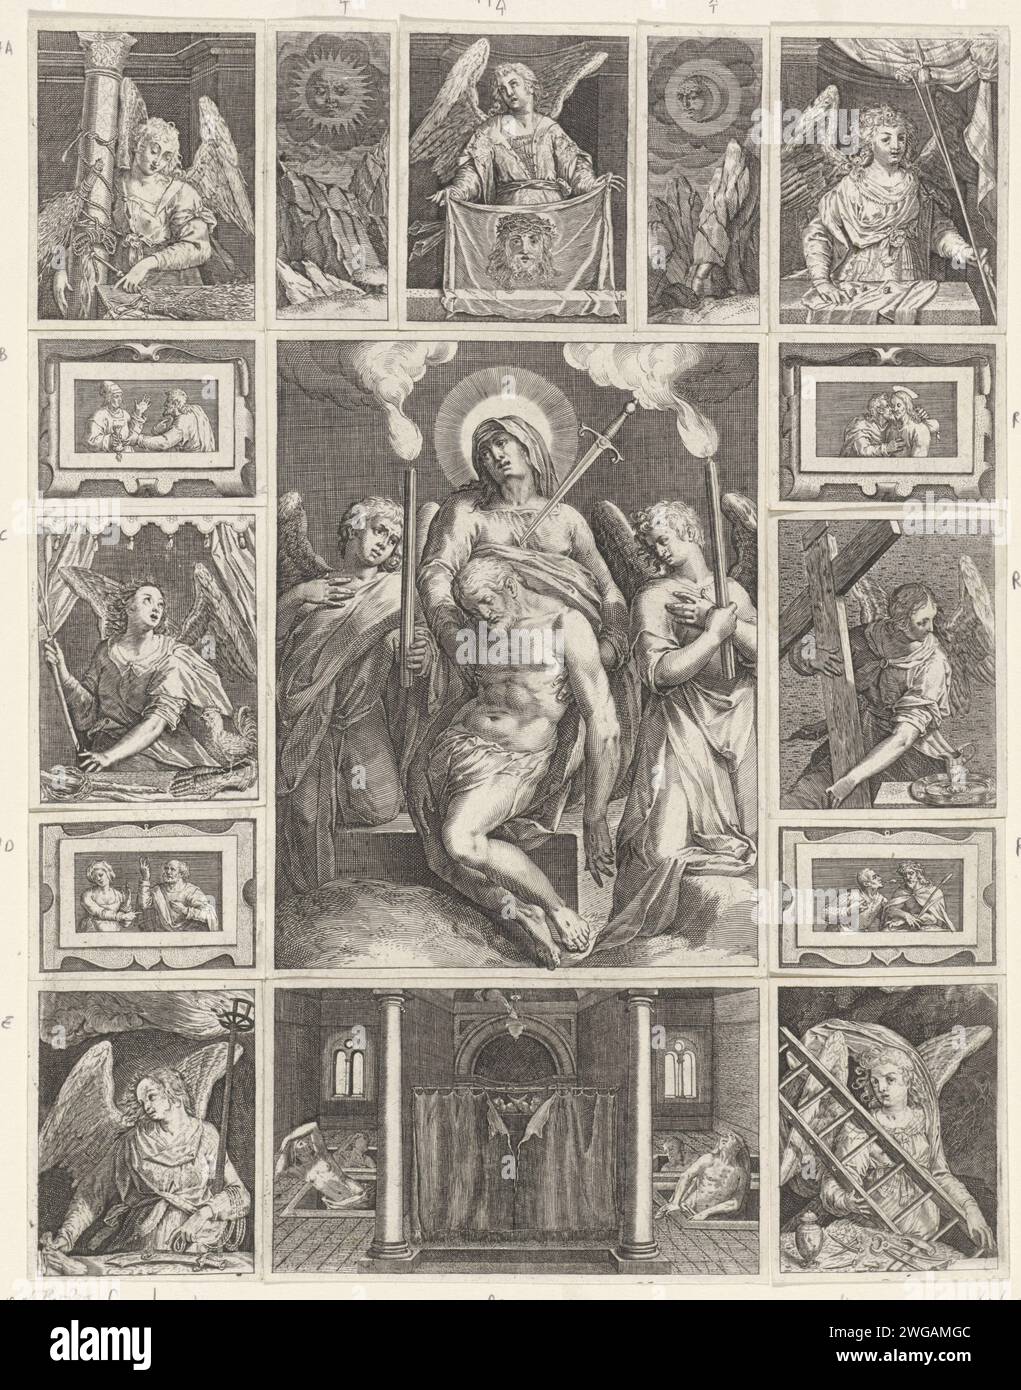 Pietà, Omringd Door the Passwords, Johan Sadlers (I), After HiewerMote, After Taddeo Vereidi, After Aereidi,, 1580 print The Virgin Mary keeps the deceased Christ in her hands. She is flanked by two angels with toortsen. The show is surrounded by seven small performances of Engelen with passion attributes and seven performance of scenes from the passion. Onderaarn in the middle the ark of the covenant behind a curtain. Open graves around the Ark that seem to crawl.  paper engraving 'PietÃ ', 'Vesperbild', 'Marienklage' (no others present): Christ, either with or without crown of thorns, mourne Stock Photo